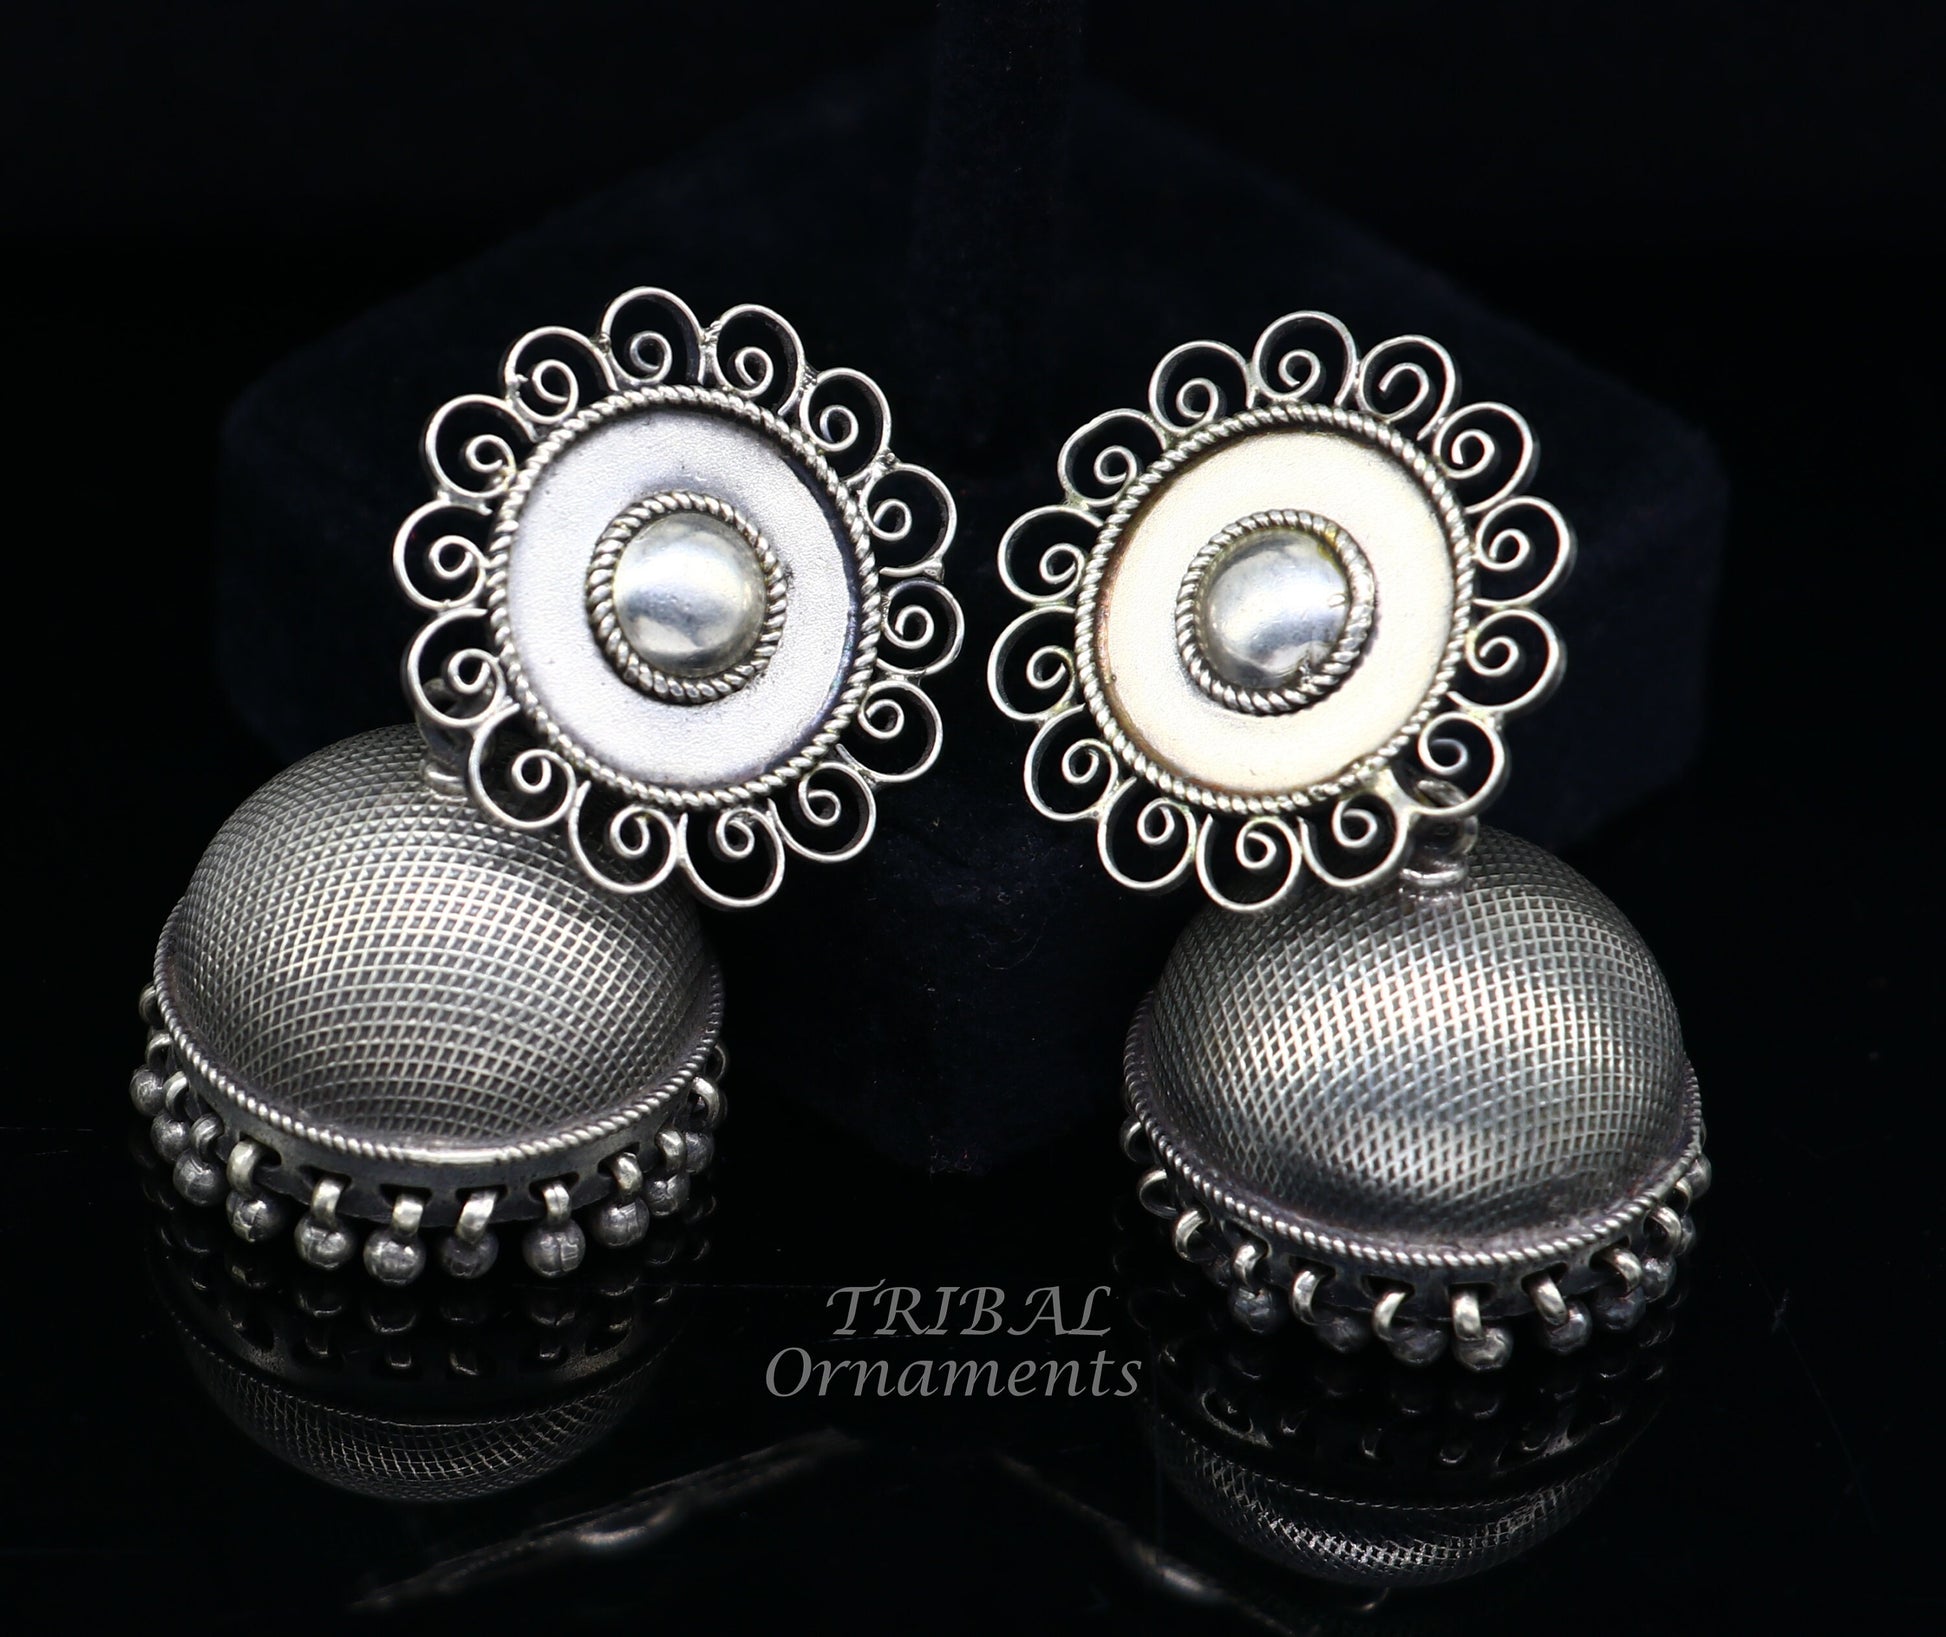 925 sterling silver handmade fabulous design jhumka stud earring, best garba navratri belly dance and wedding party stylish jewelry s1042 - TRIBAL ORNAMENTS